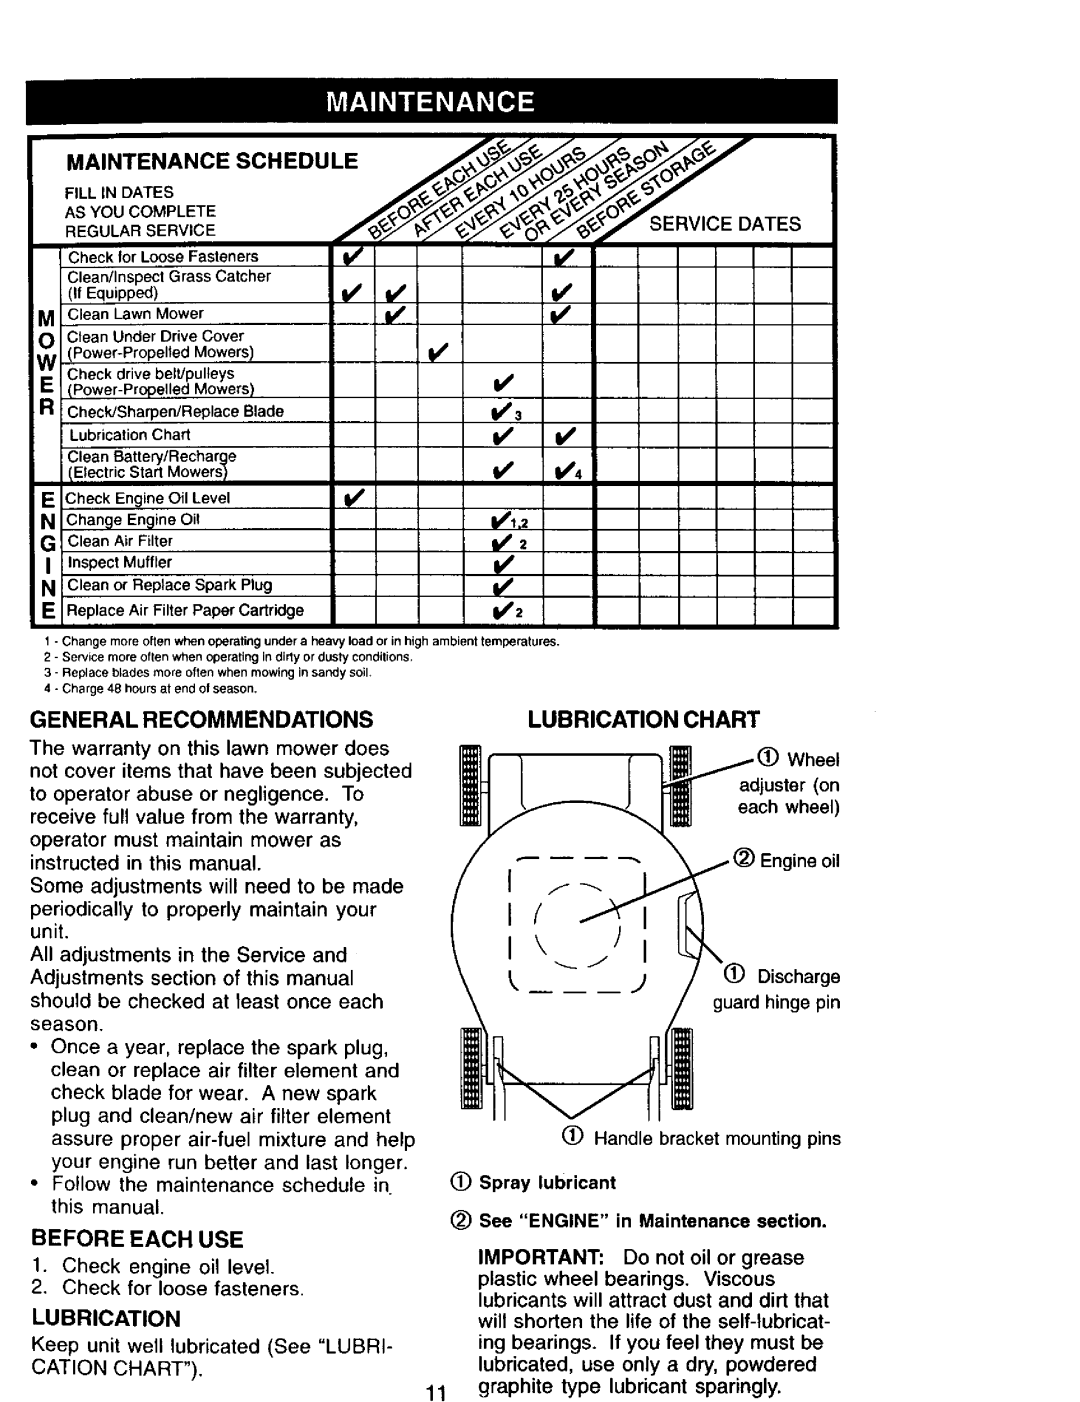 Sears 944.36201 owner manual A,Ntenanoesc.Edule, r . C-ZSERVICE DATES, Keep unit well lubricated See LUBRI CATION CHART 